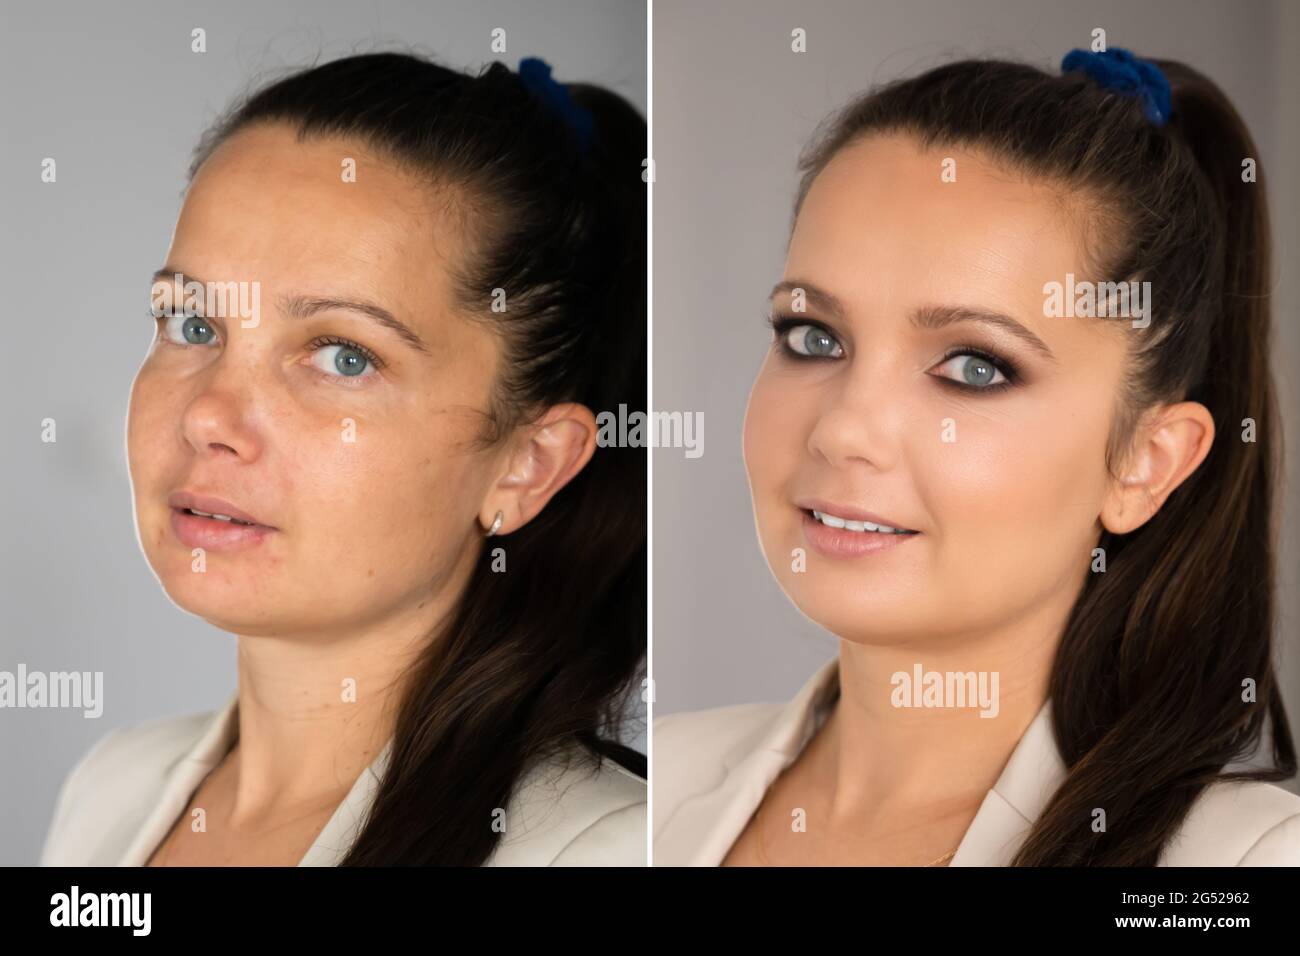 Woman Face Skin Make Up. Comparing Before And After Stock Photo